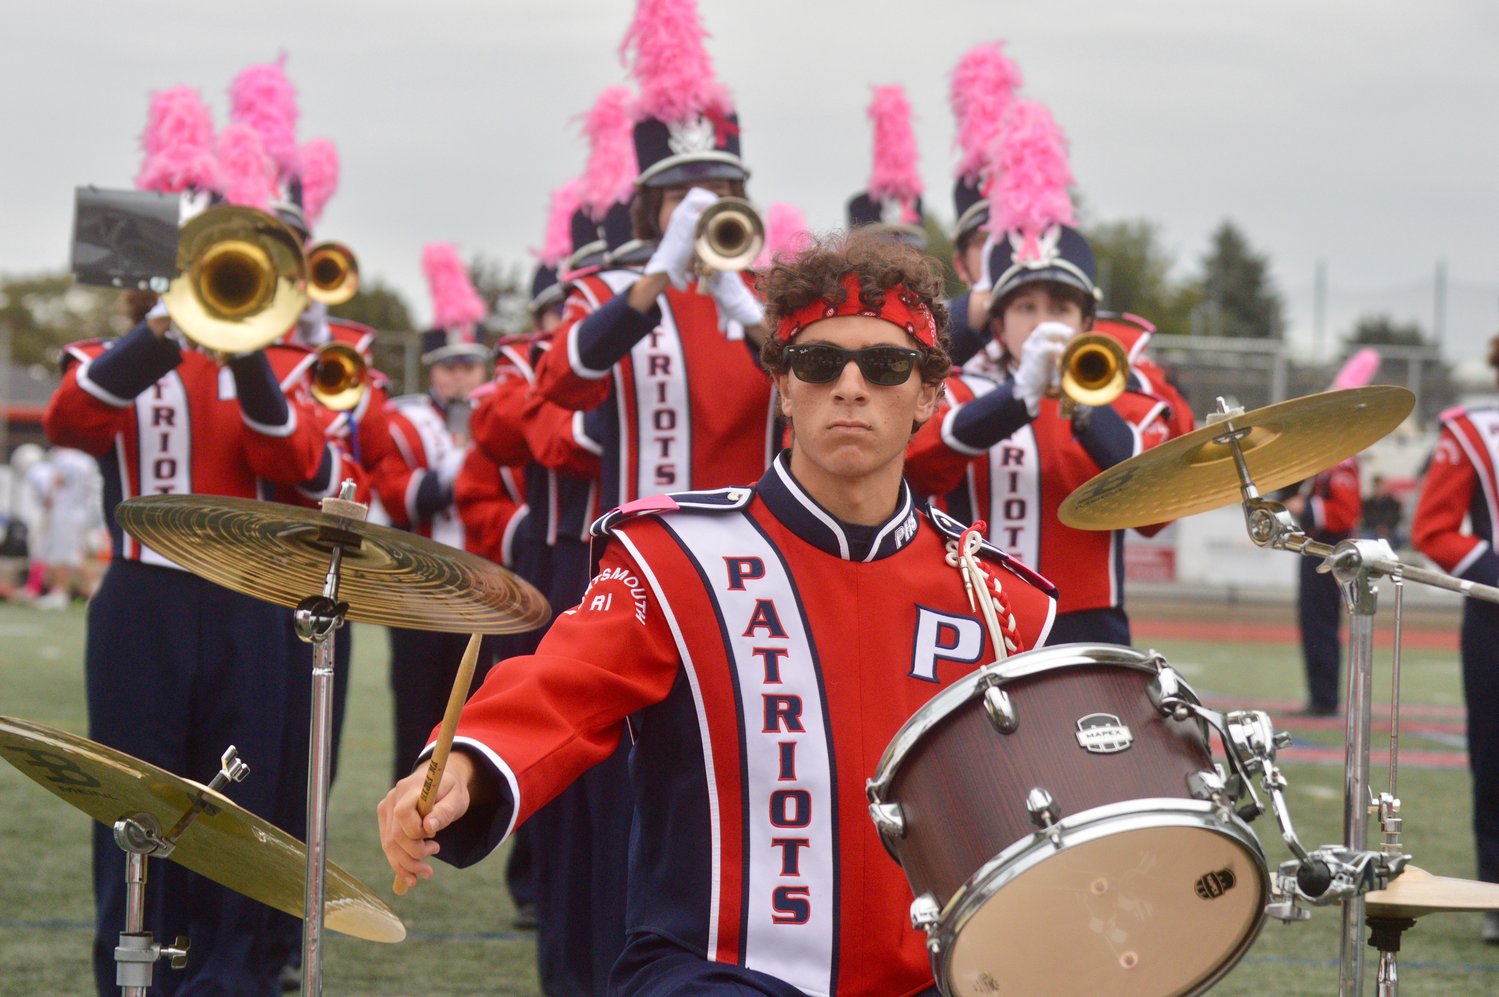 Nate Levine accompanies the marching band on drums during the halftime show.